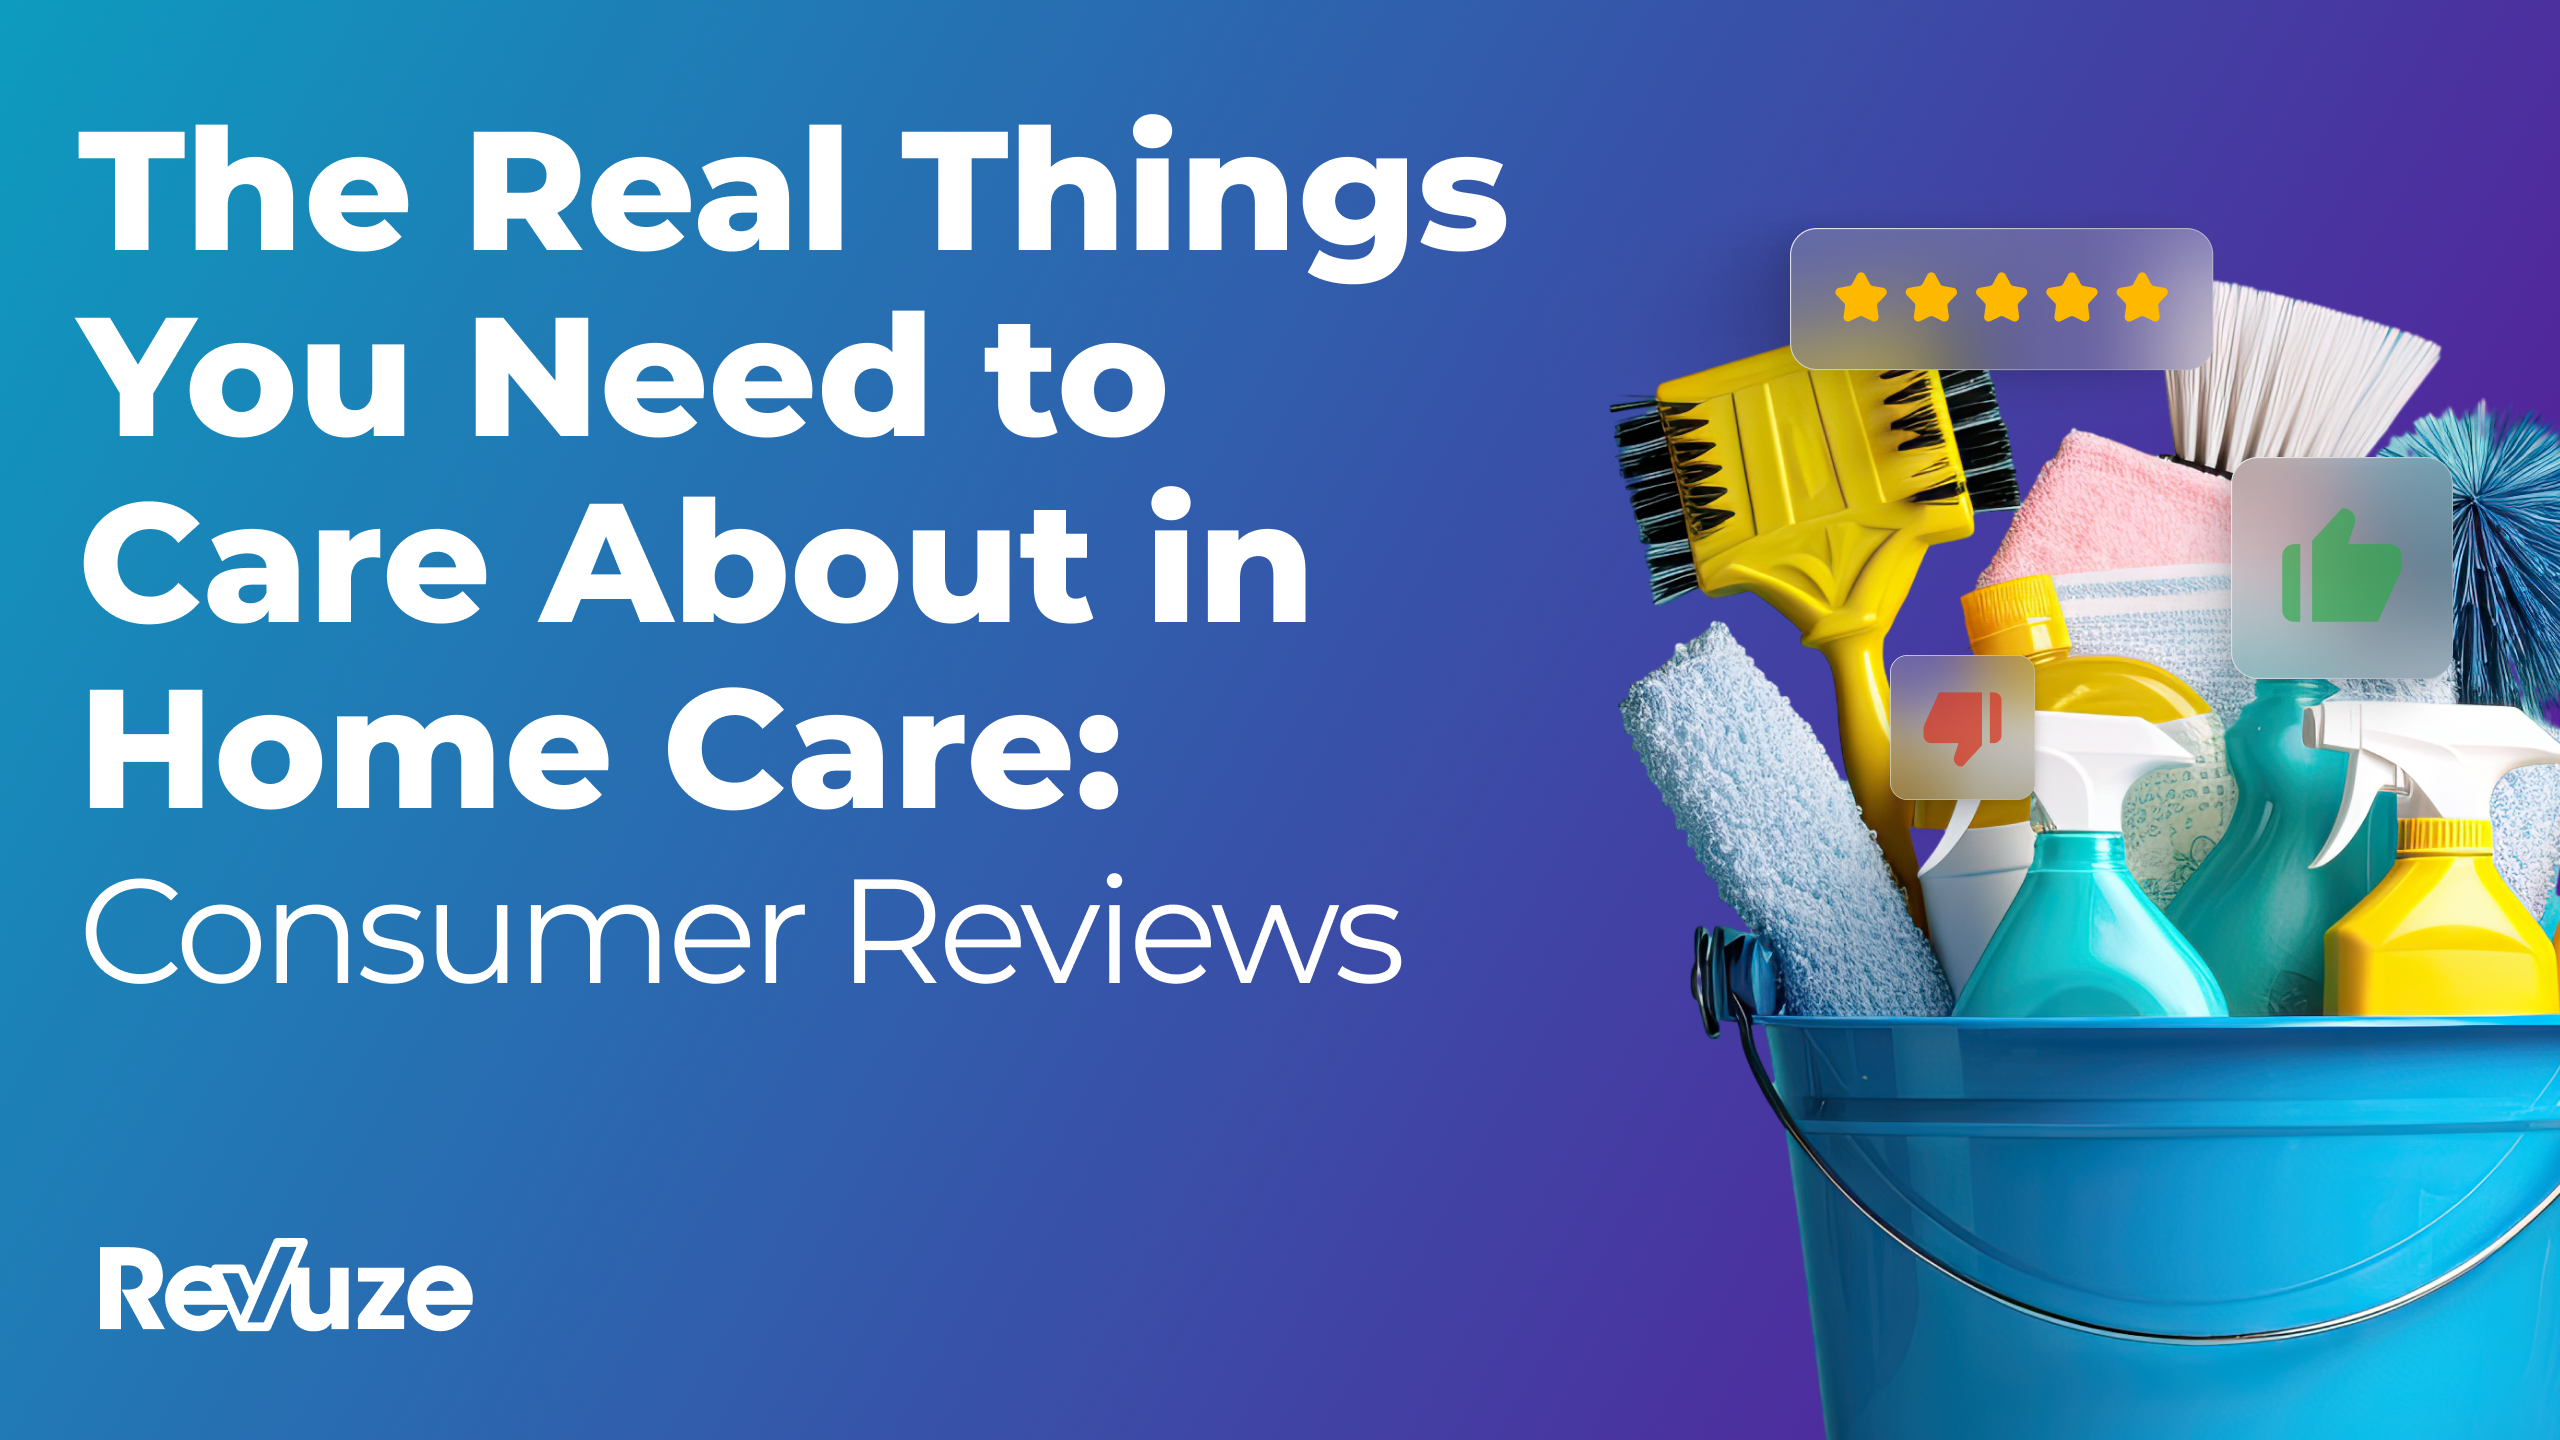 The Real Things You Need to Care About in Home Care: Consumer Reviews